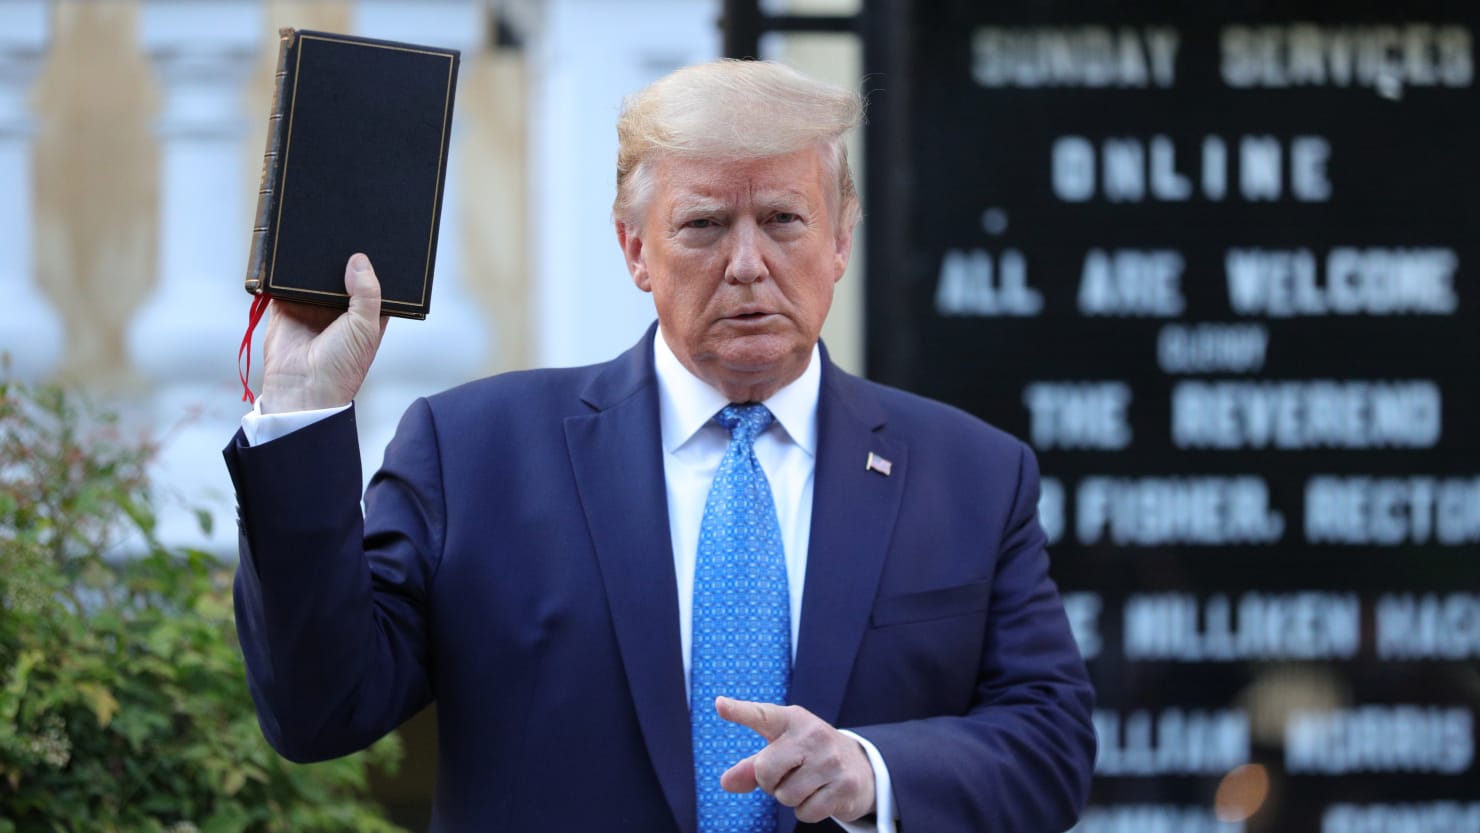 Trump expresses his “LOVE” for the introduction of the Ten Commandments in schools